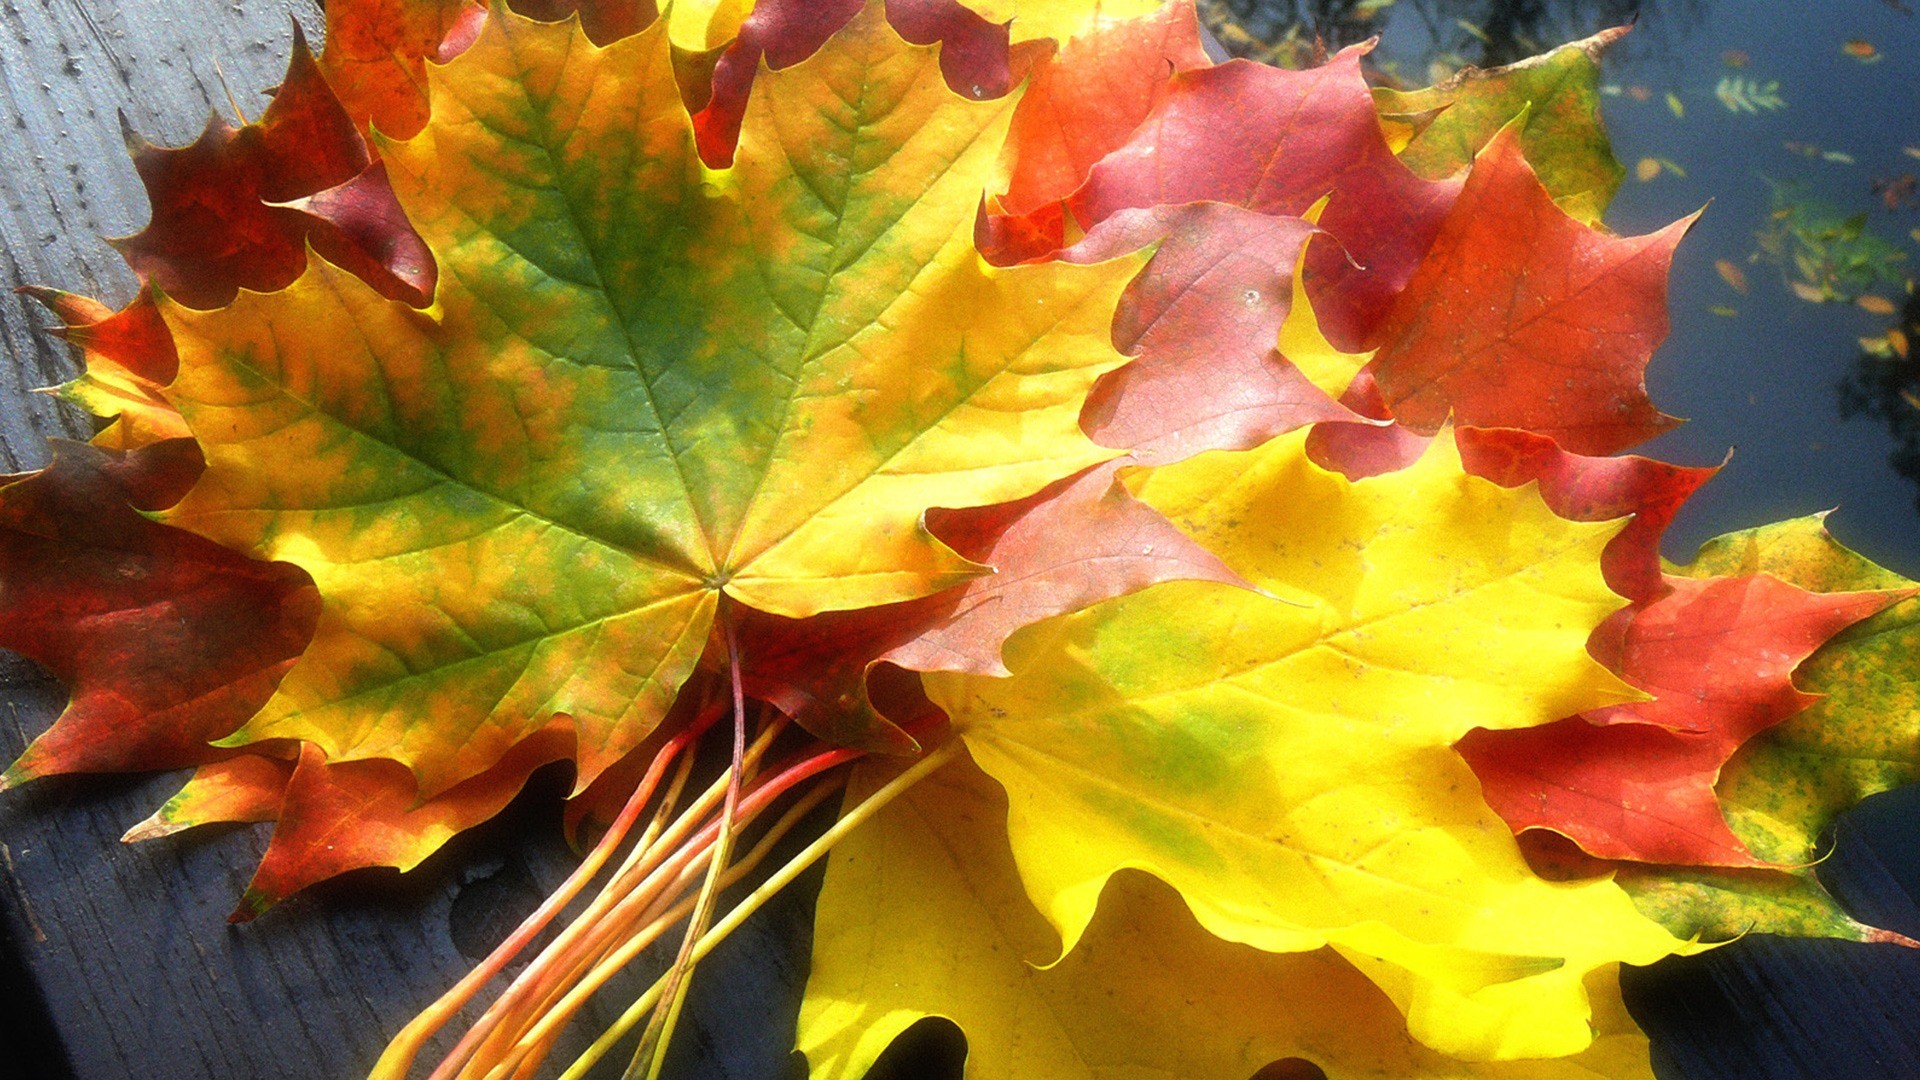 1920x1080 Fall Leaves Wallpaper Autumn Nature Wallpapers